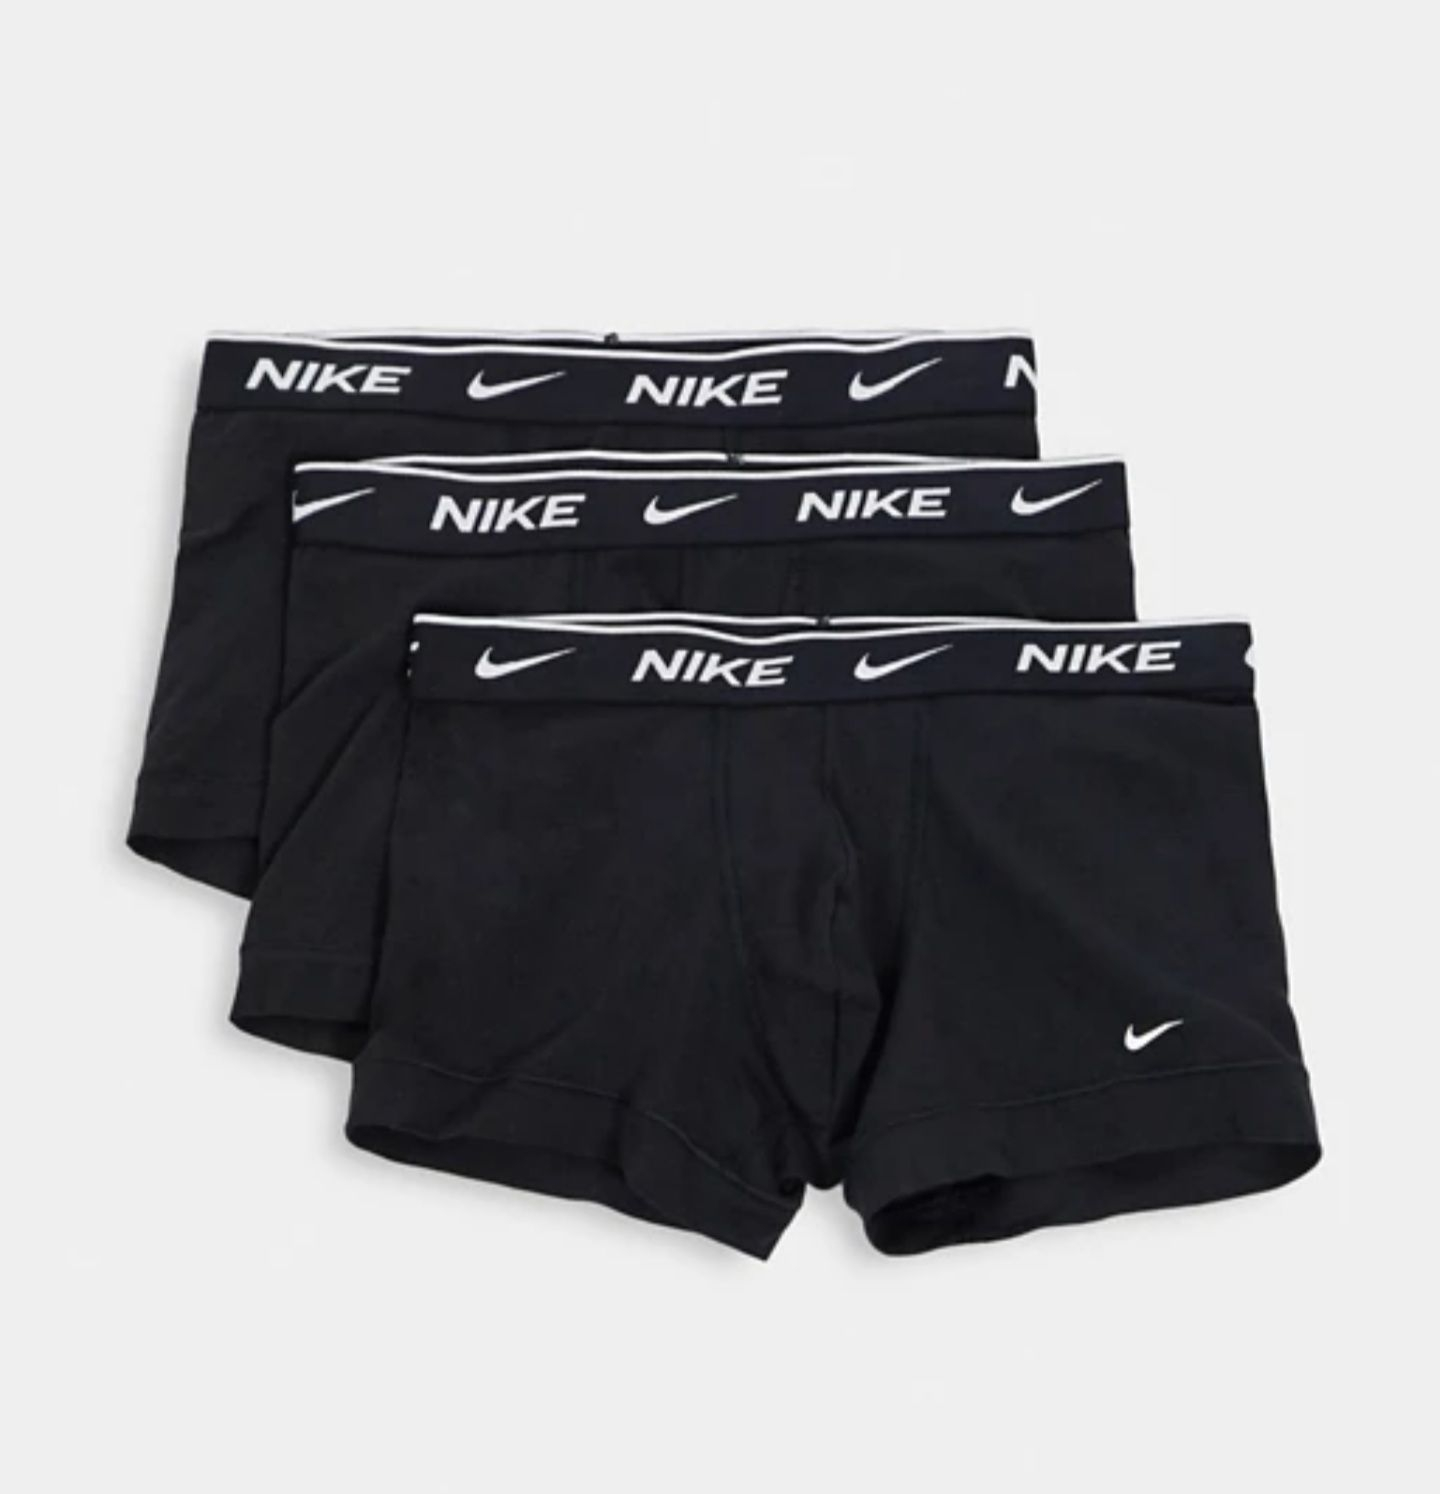 Nike 3 pack cotton stretch trunks in black - £20.80 (+£4 Postage) 20% ...